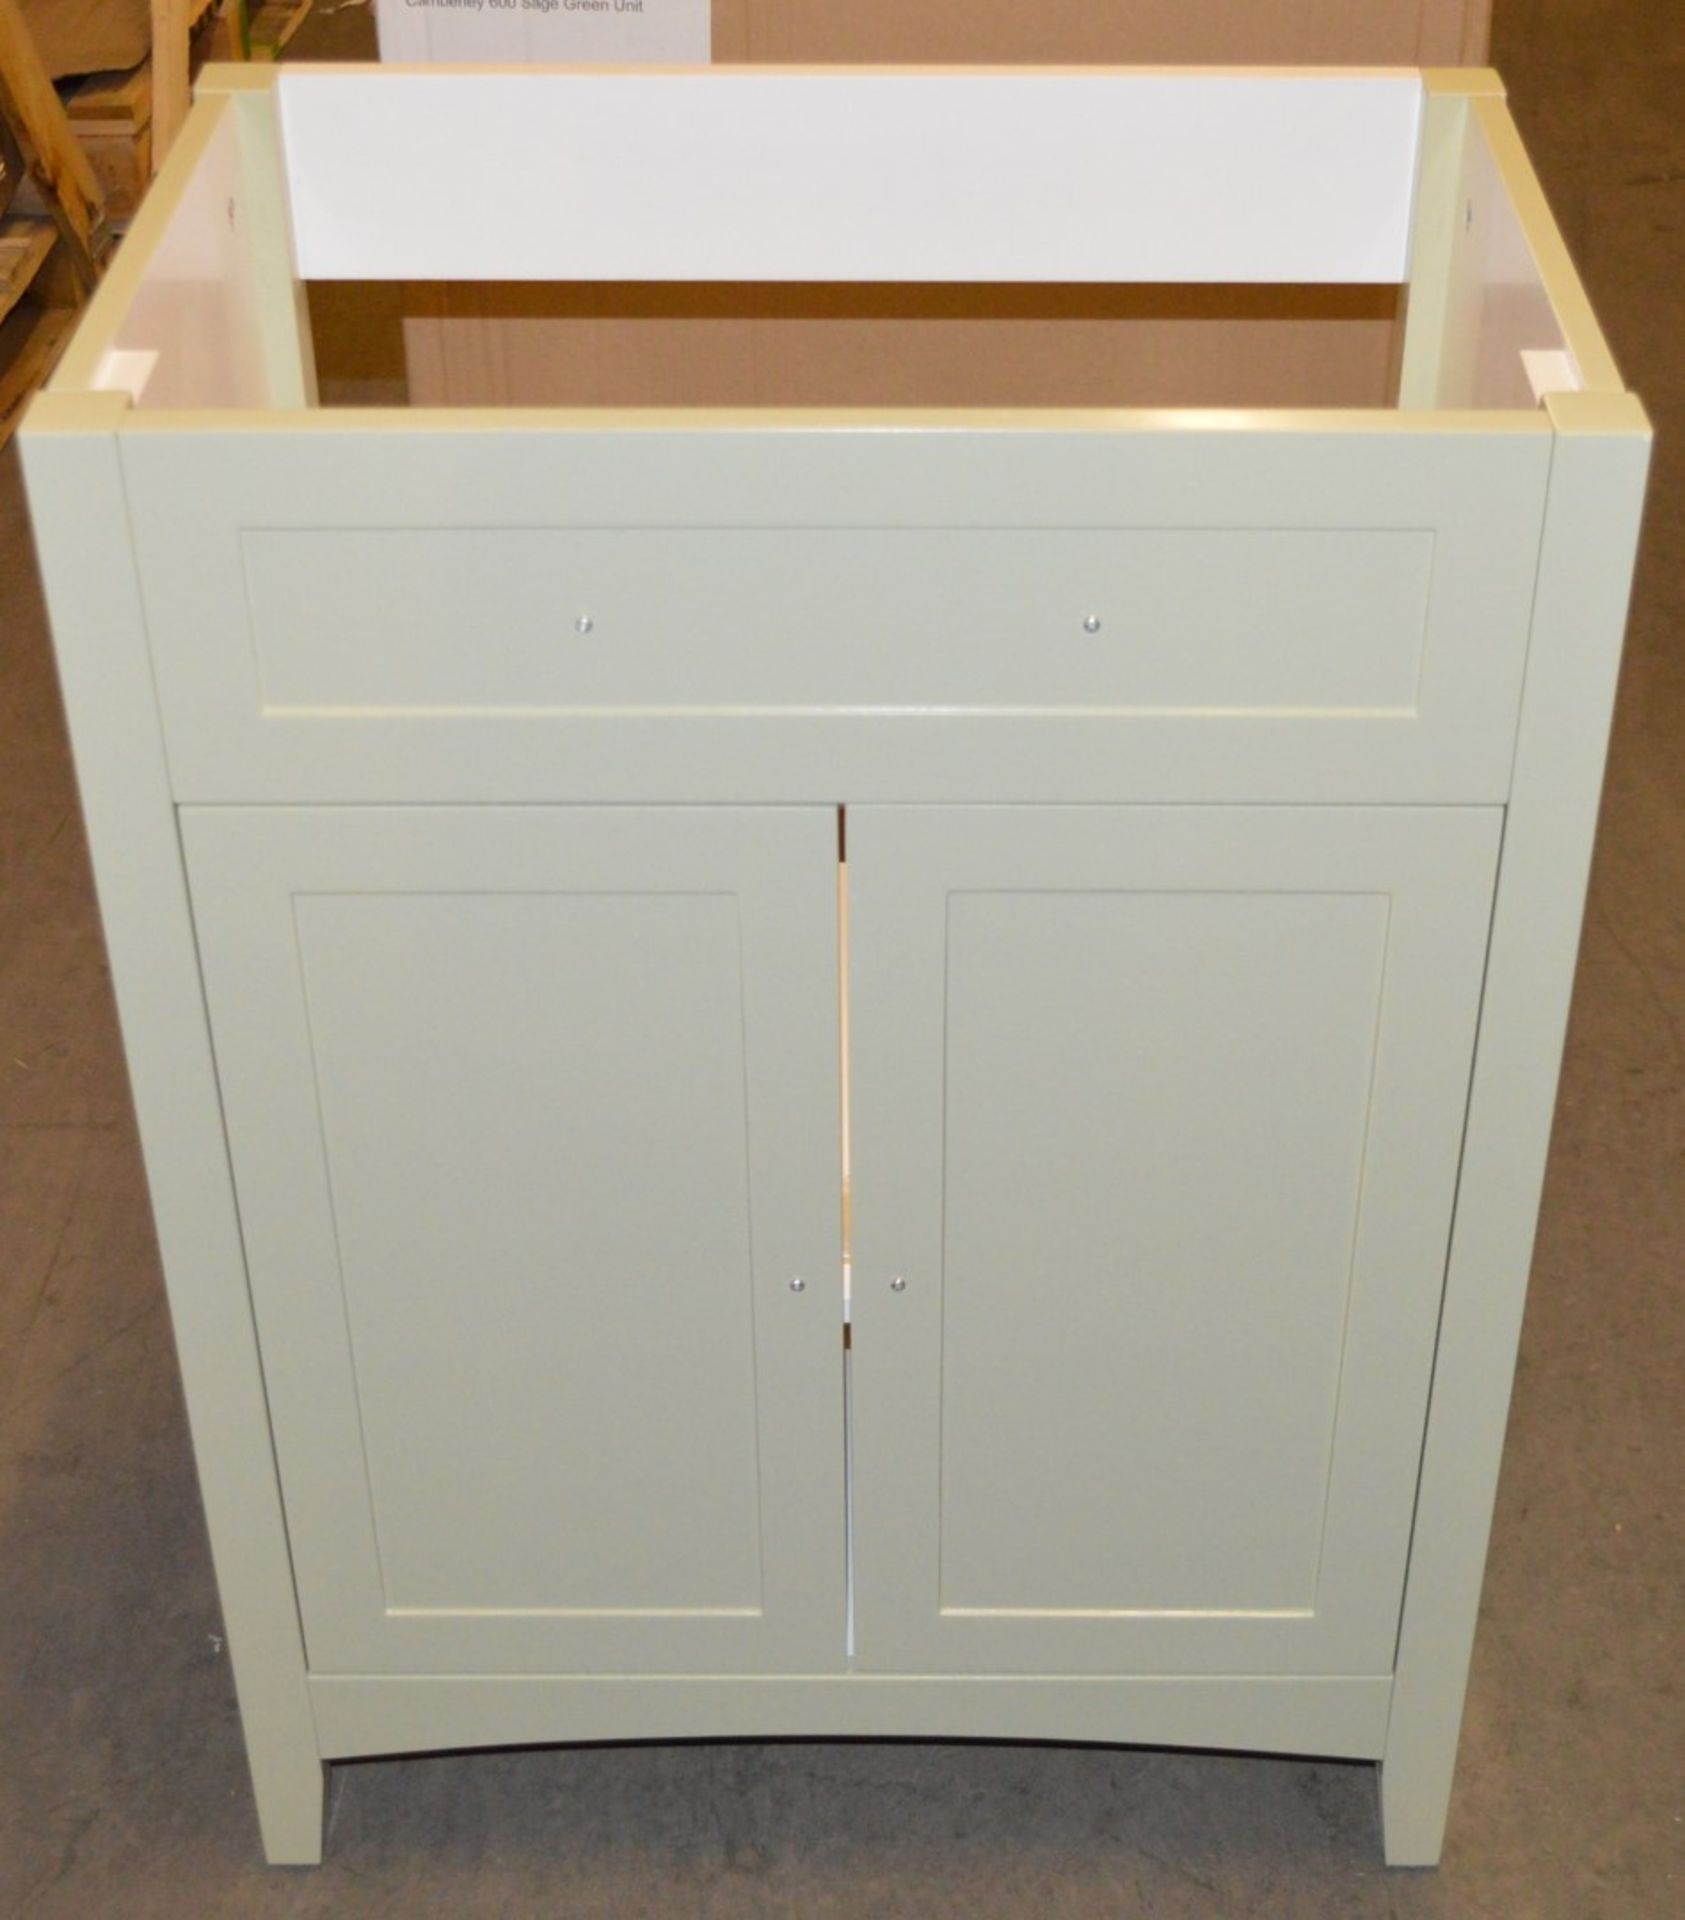 1 x Camberley Bathroom Furniture Set Including 600mm Vanity Unit, Back to Wall Toilet Unit and - Image 11 of 18